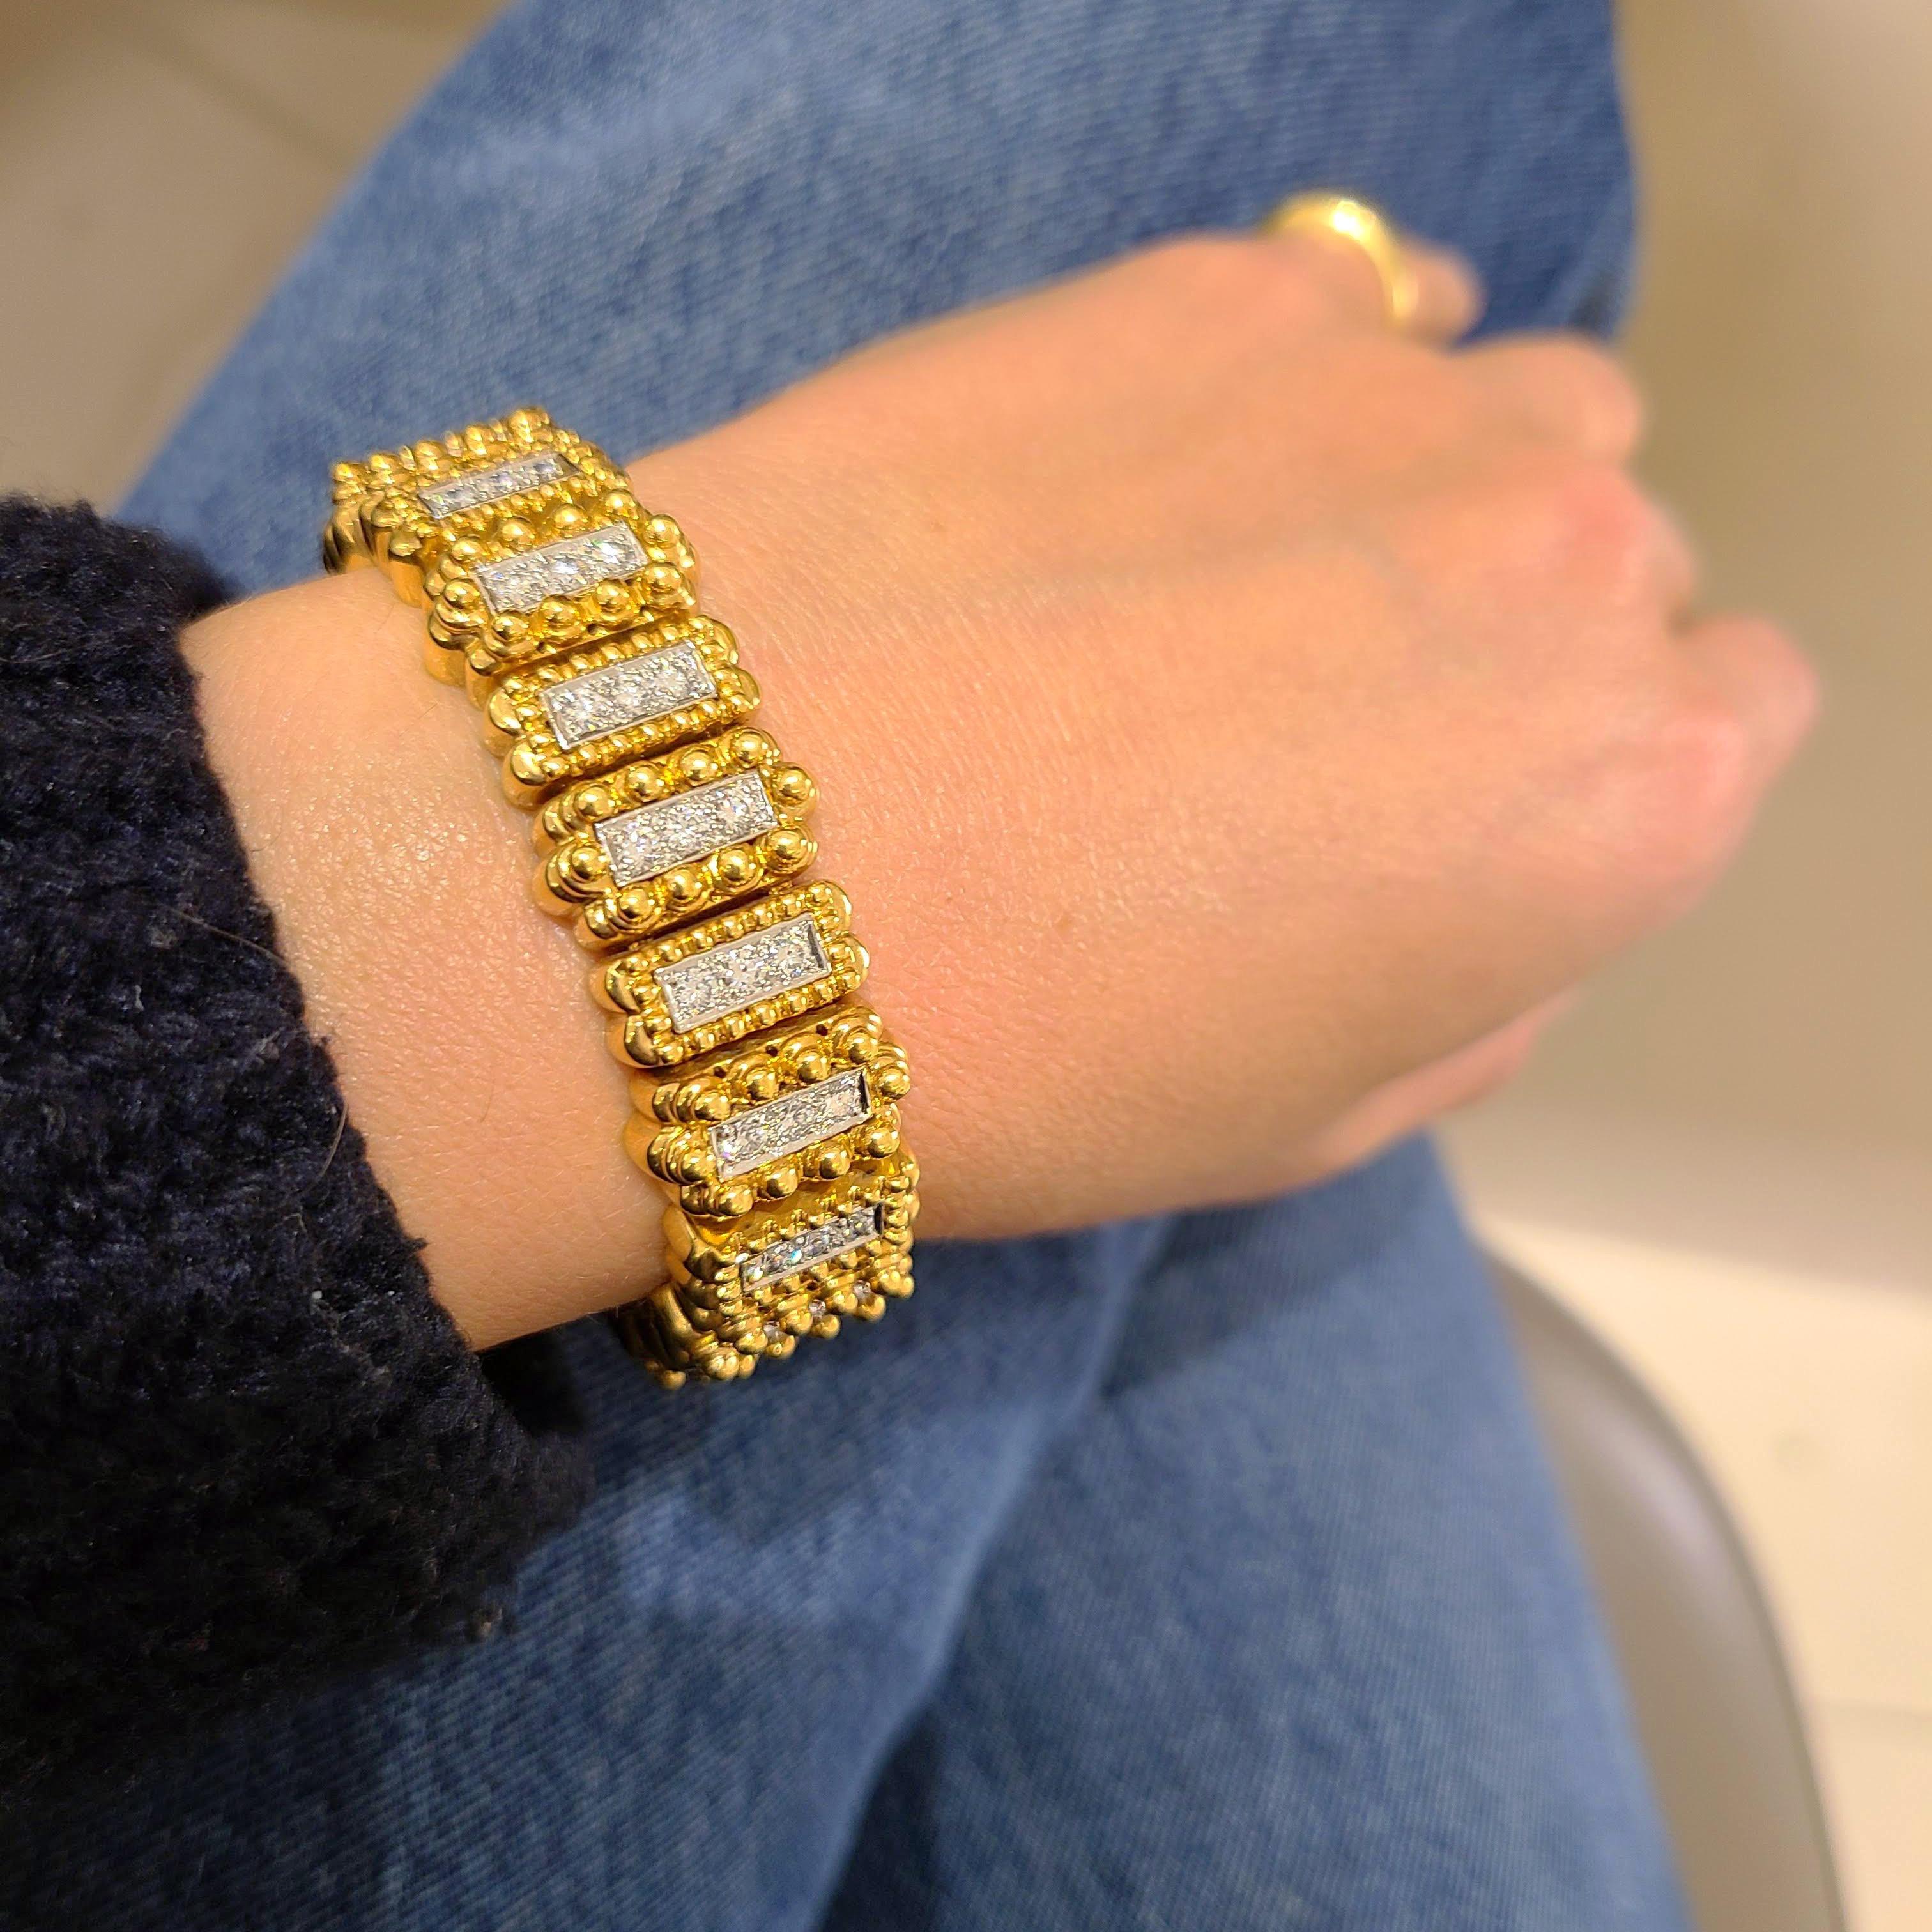 A beautiful 18 karat yellow gold, platinum & diamond bracelet designed by Tilson Gem Designs for their Chaavae collection.
The bracelet is composed of 22 individual yellow gold raised beaded sections. Each section is set with a vertical row of 3